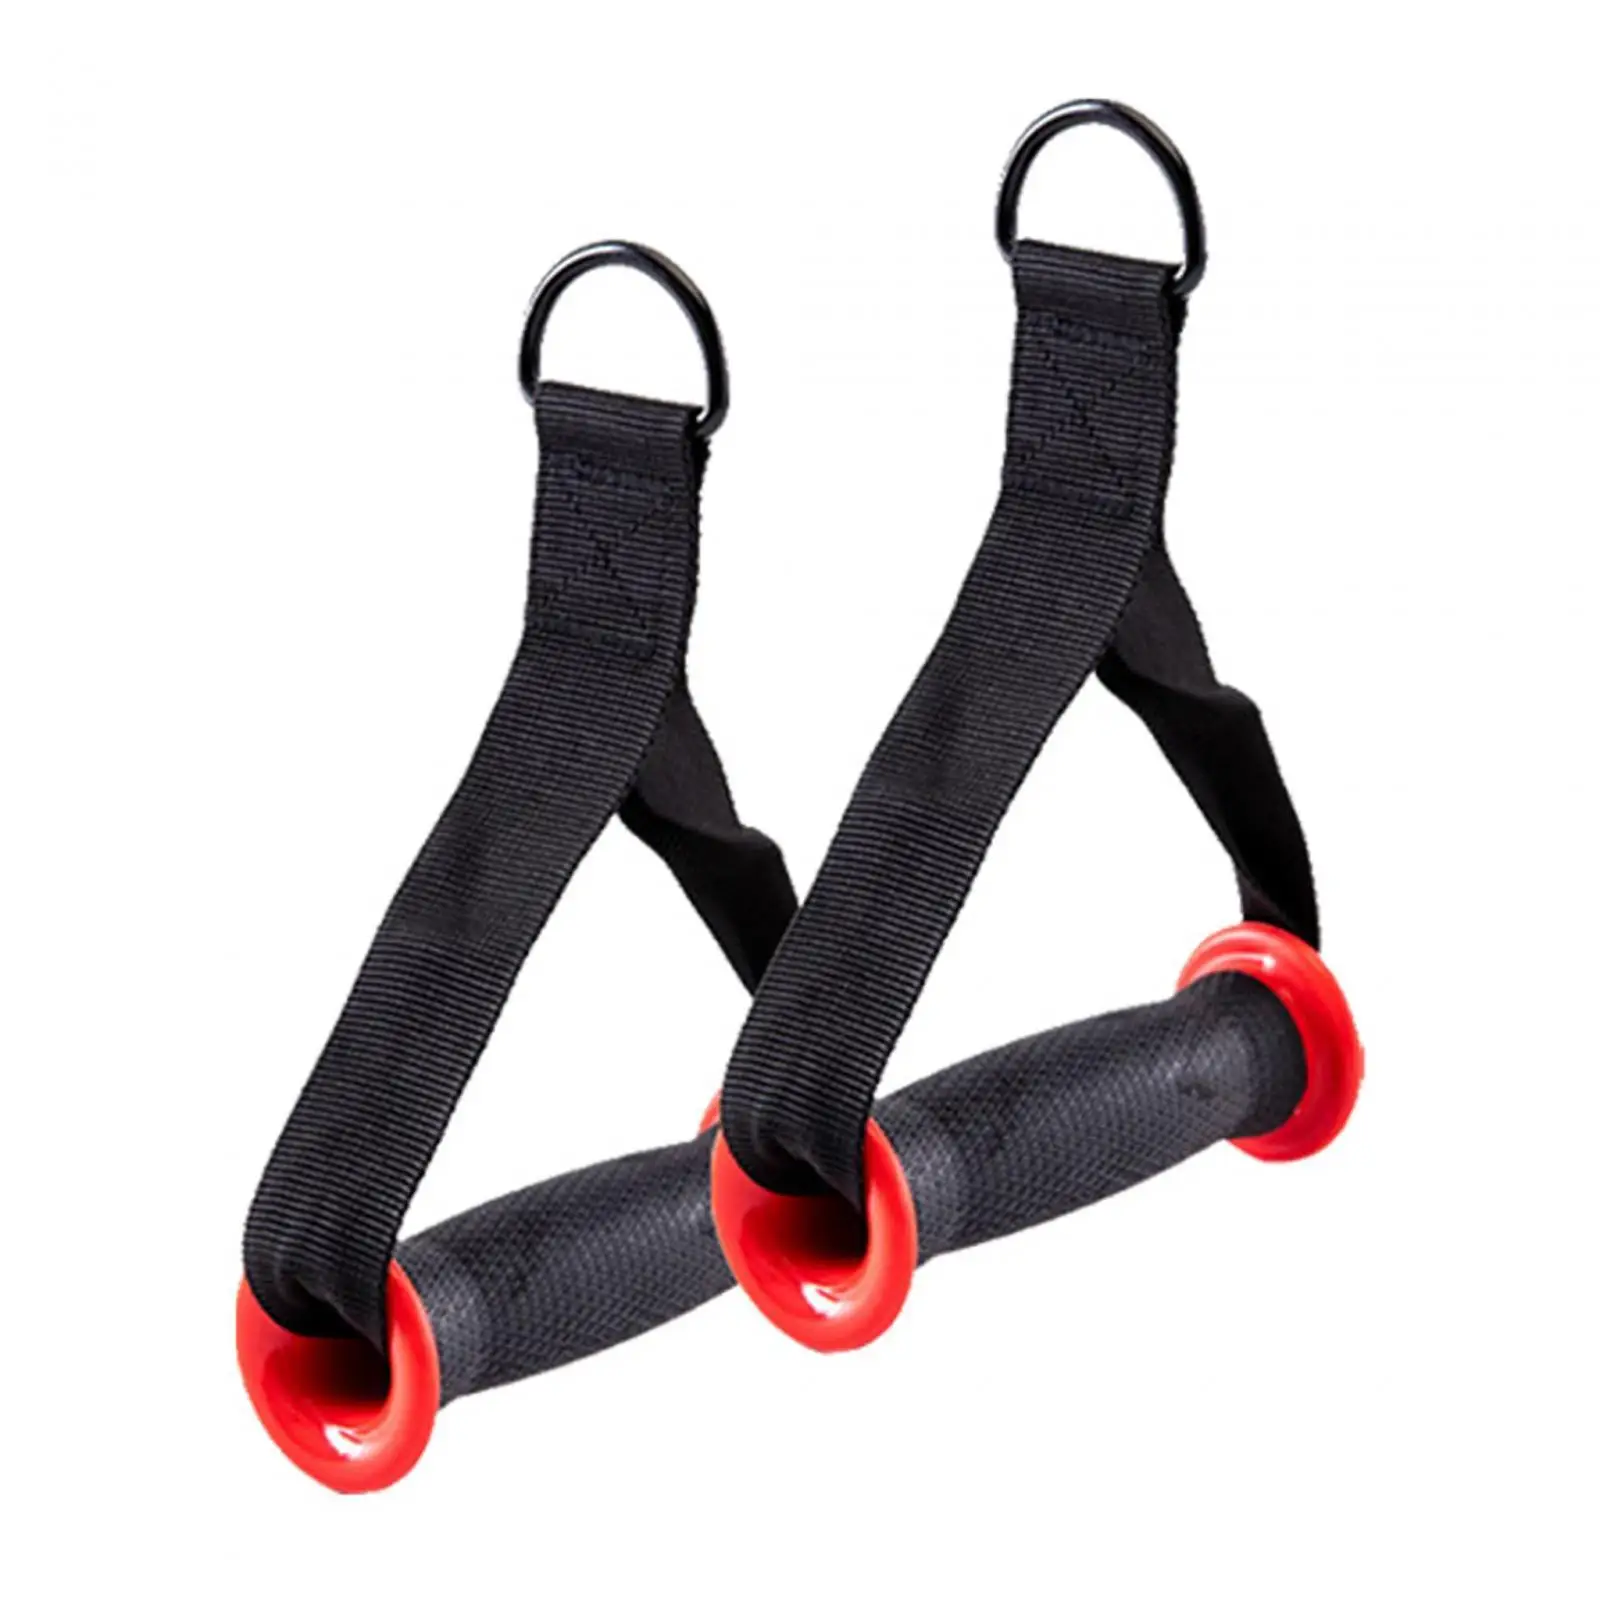 2Pcs Gym Handle Resistance Bands Gym Accessory Multi Attachment Stirrup Heavy Duty Fitness Straps Strength Pull Handles